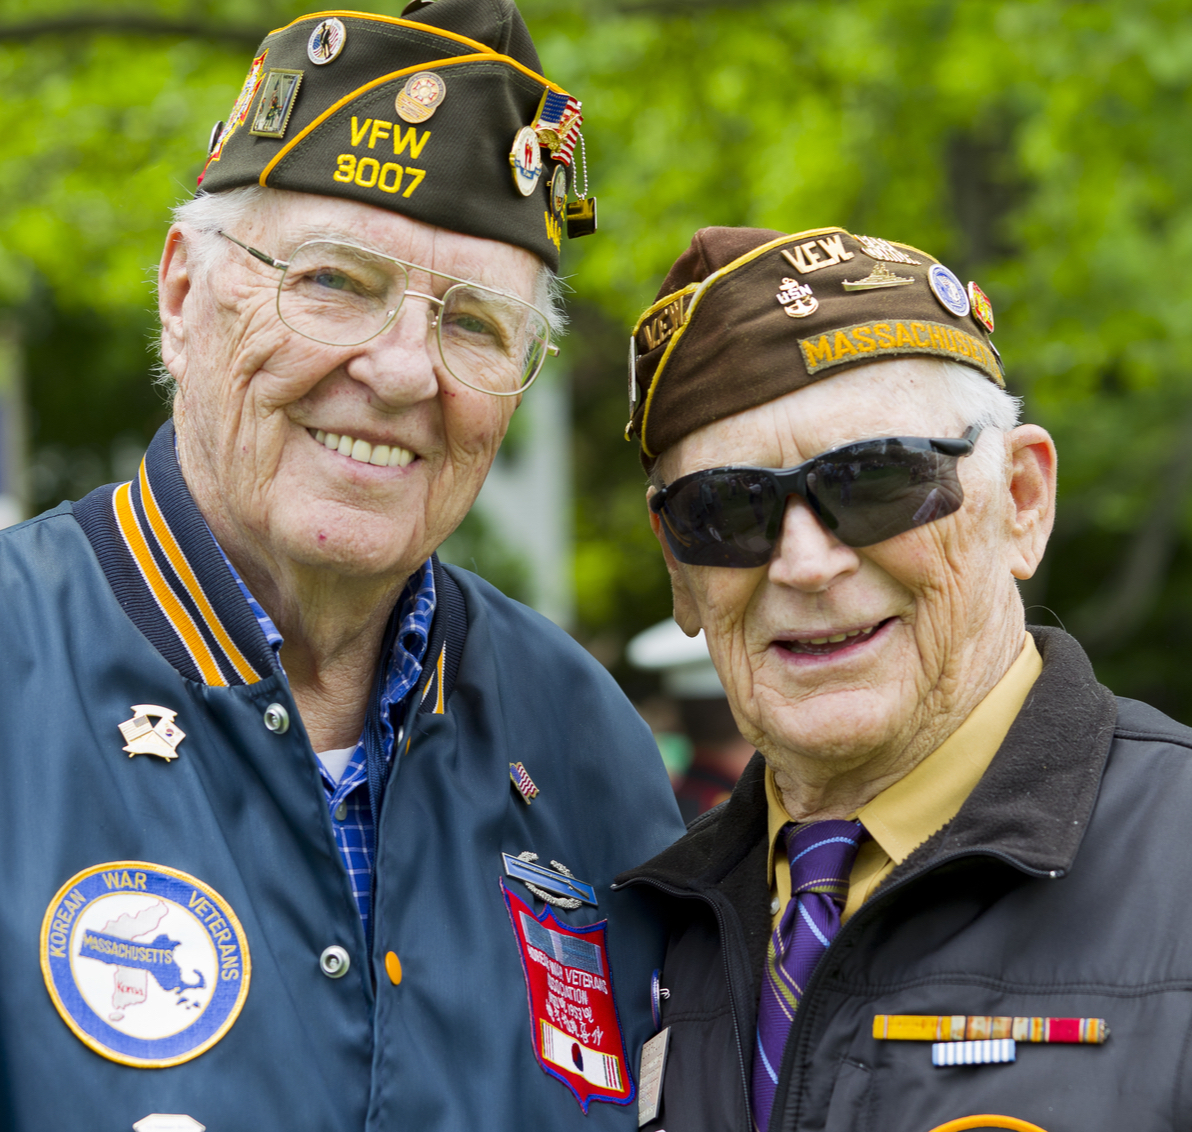 We provide quality veteran care services for veterans in the Gloucester, VA area.